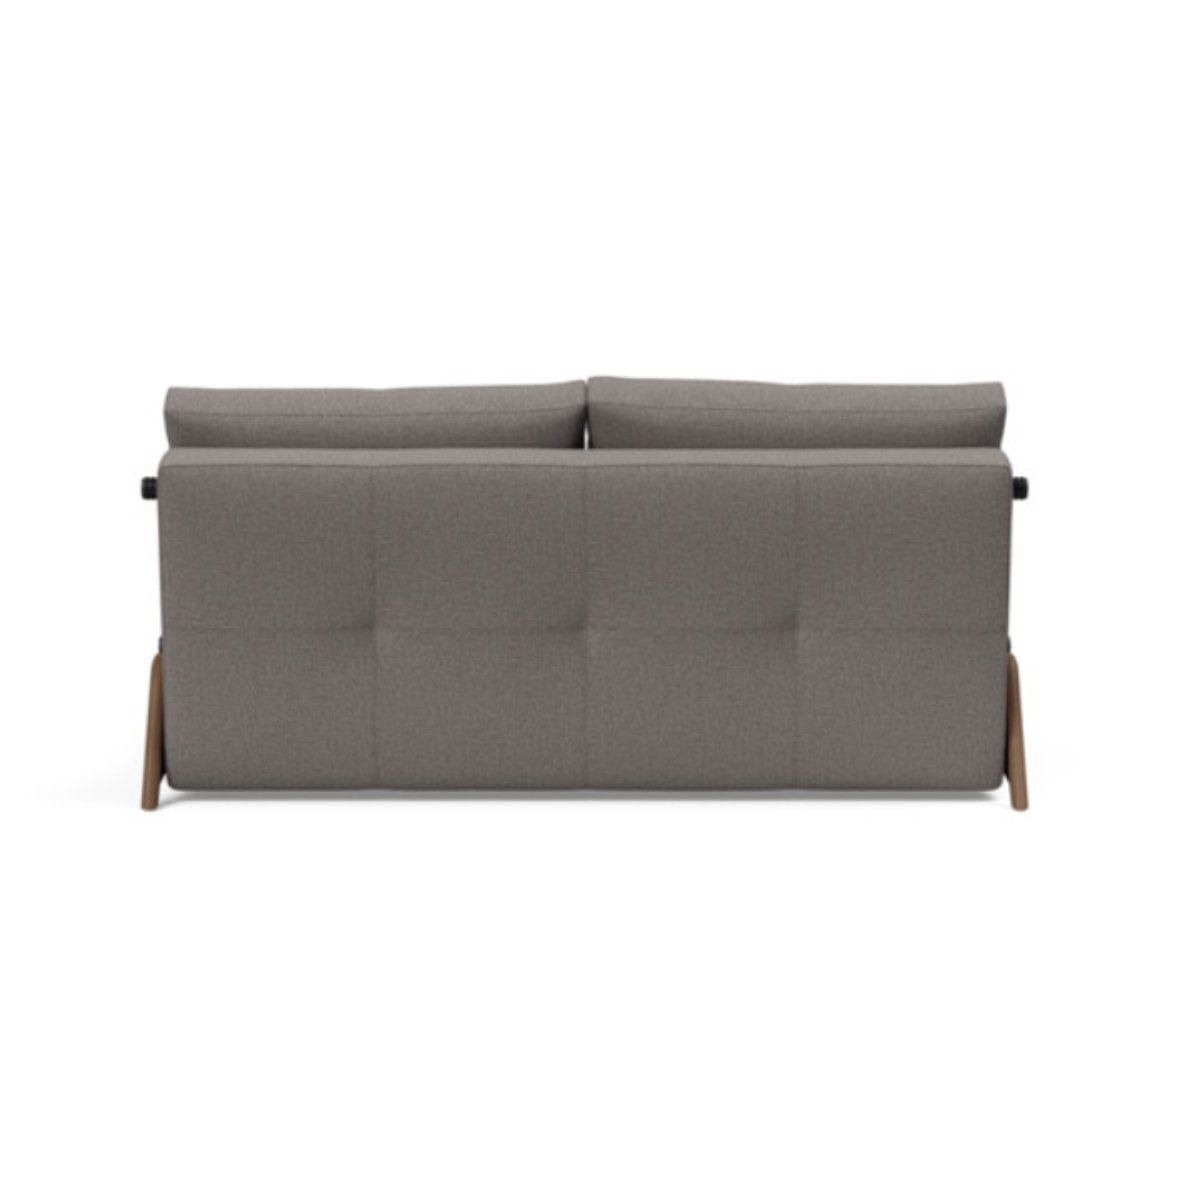 Load image into Gallery viewer, Cubed Queen Size Sofa Bed With Dark Wood Legs Sofa Beds INNOVATION     Four Hands, Burke Decor, Mid Century Modern Furniture, Old Bones Furniture Company, Old Bones Co, Modern Mid Century, Designer Furniture, https://www.oldbonesco.com/
